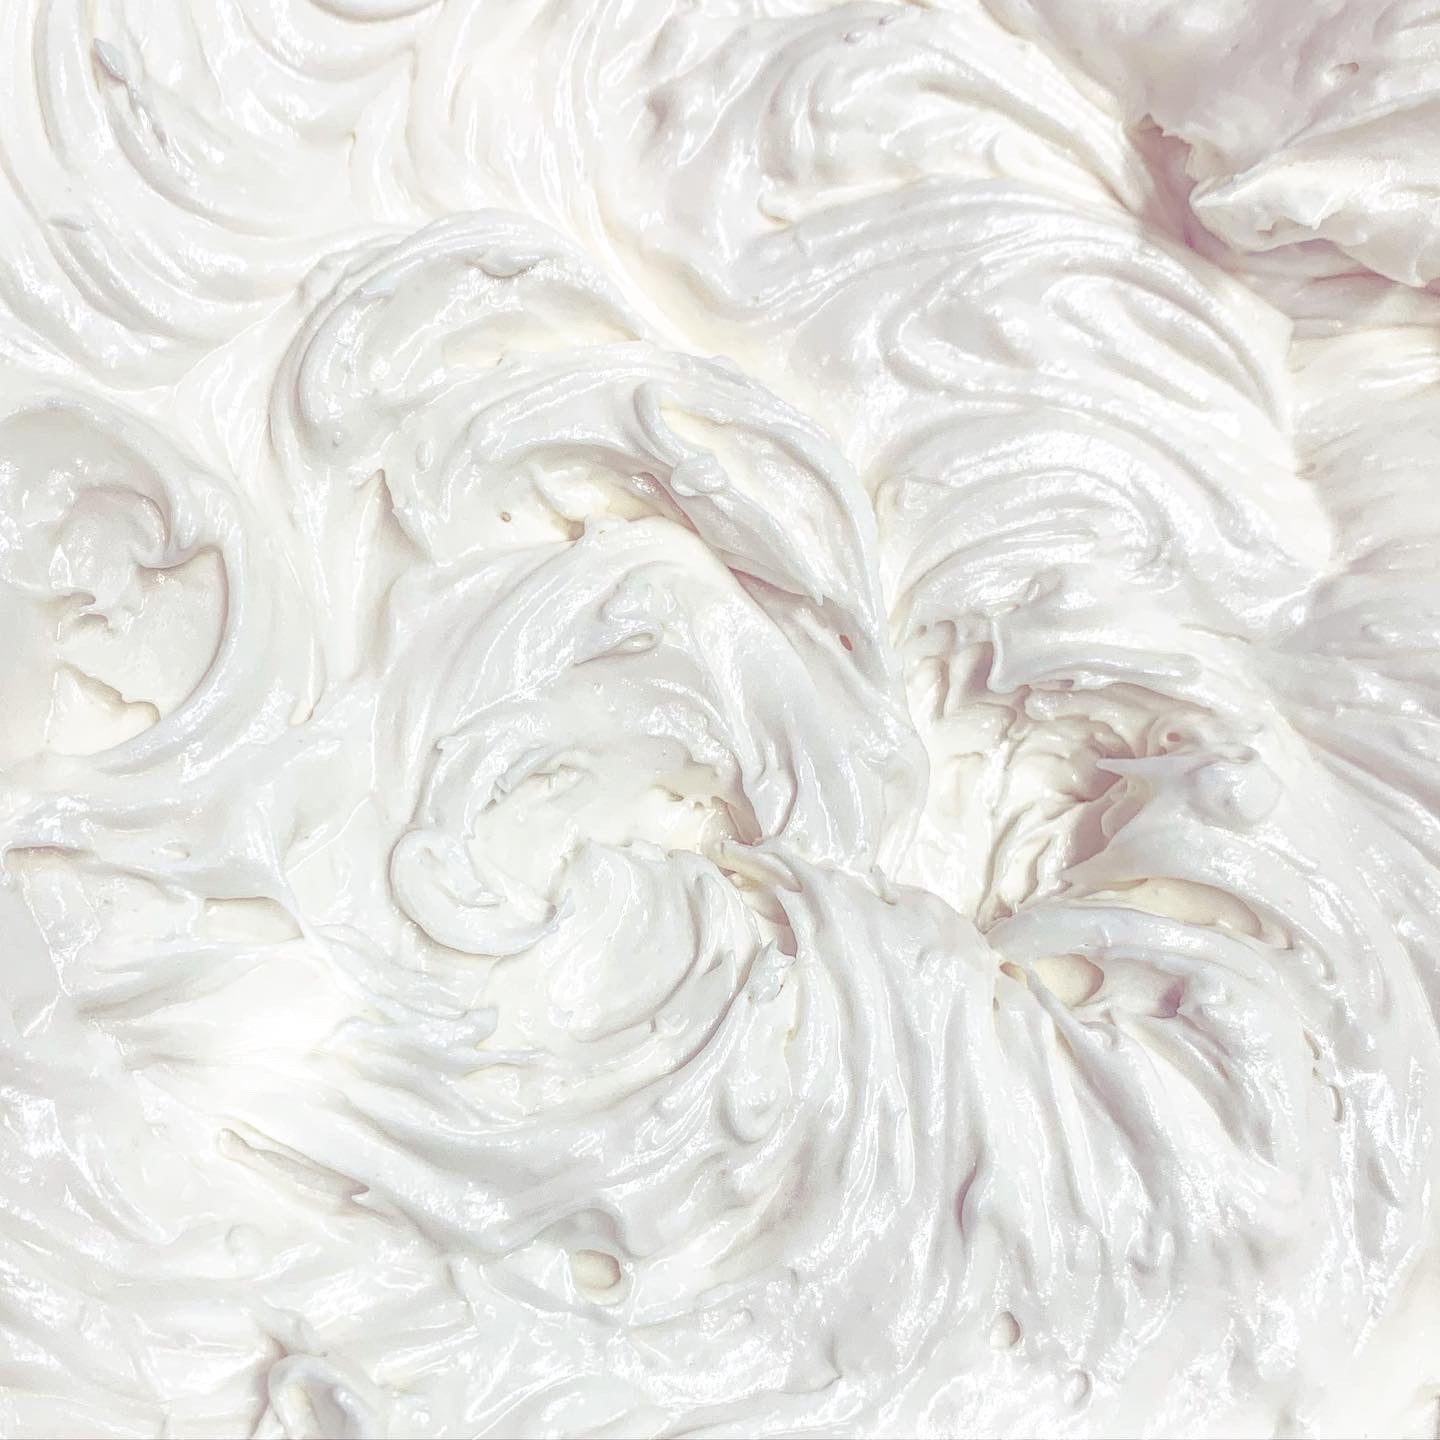 Whipped Body Butter | Orange Patchouli